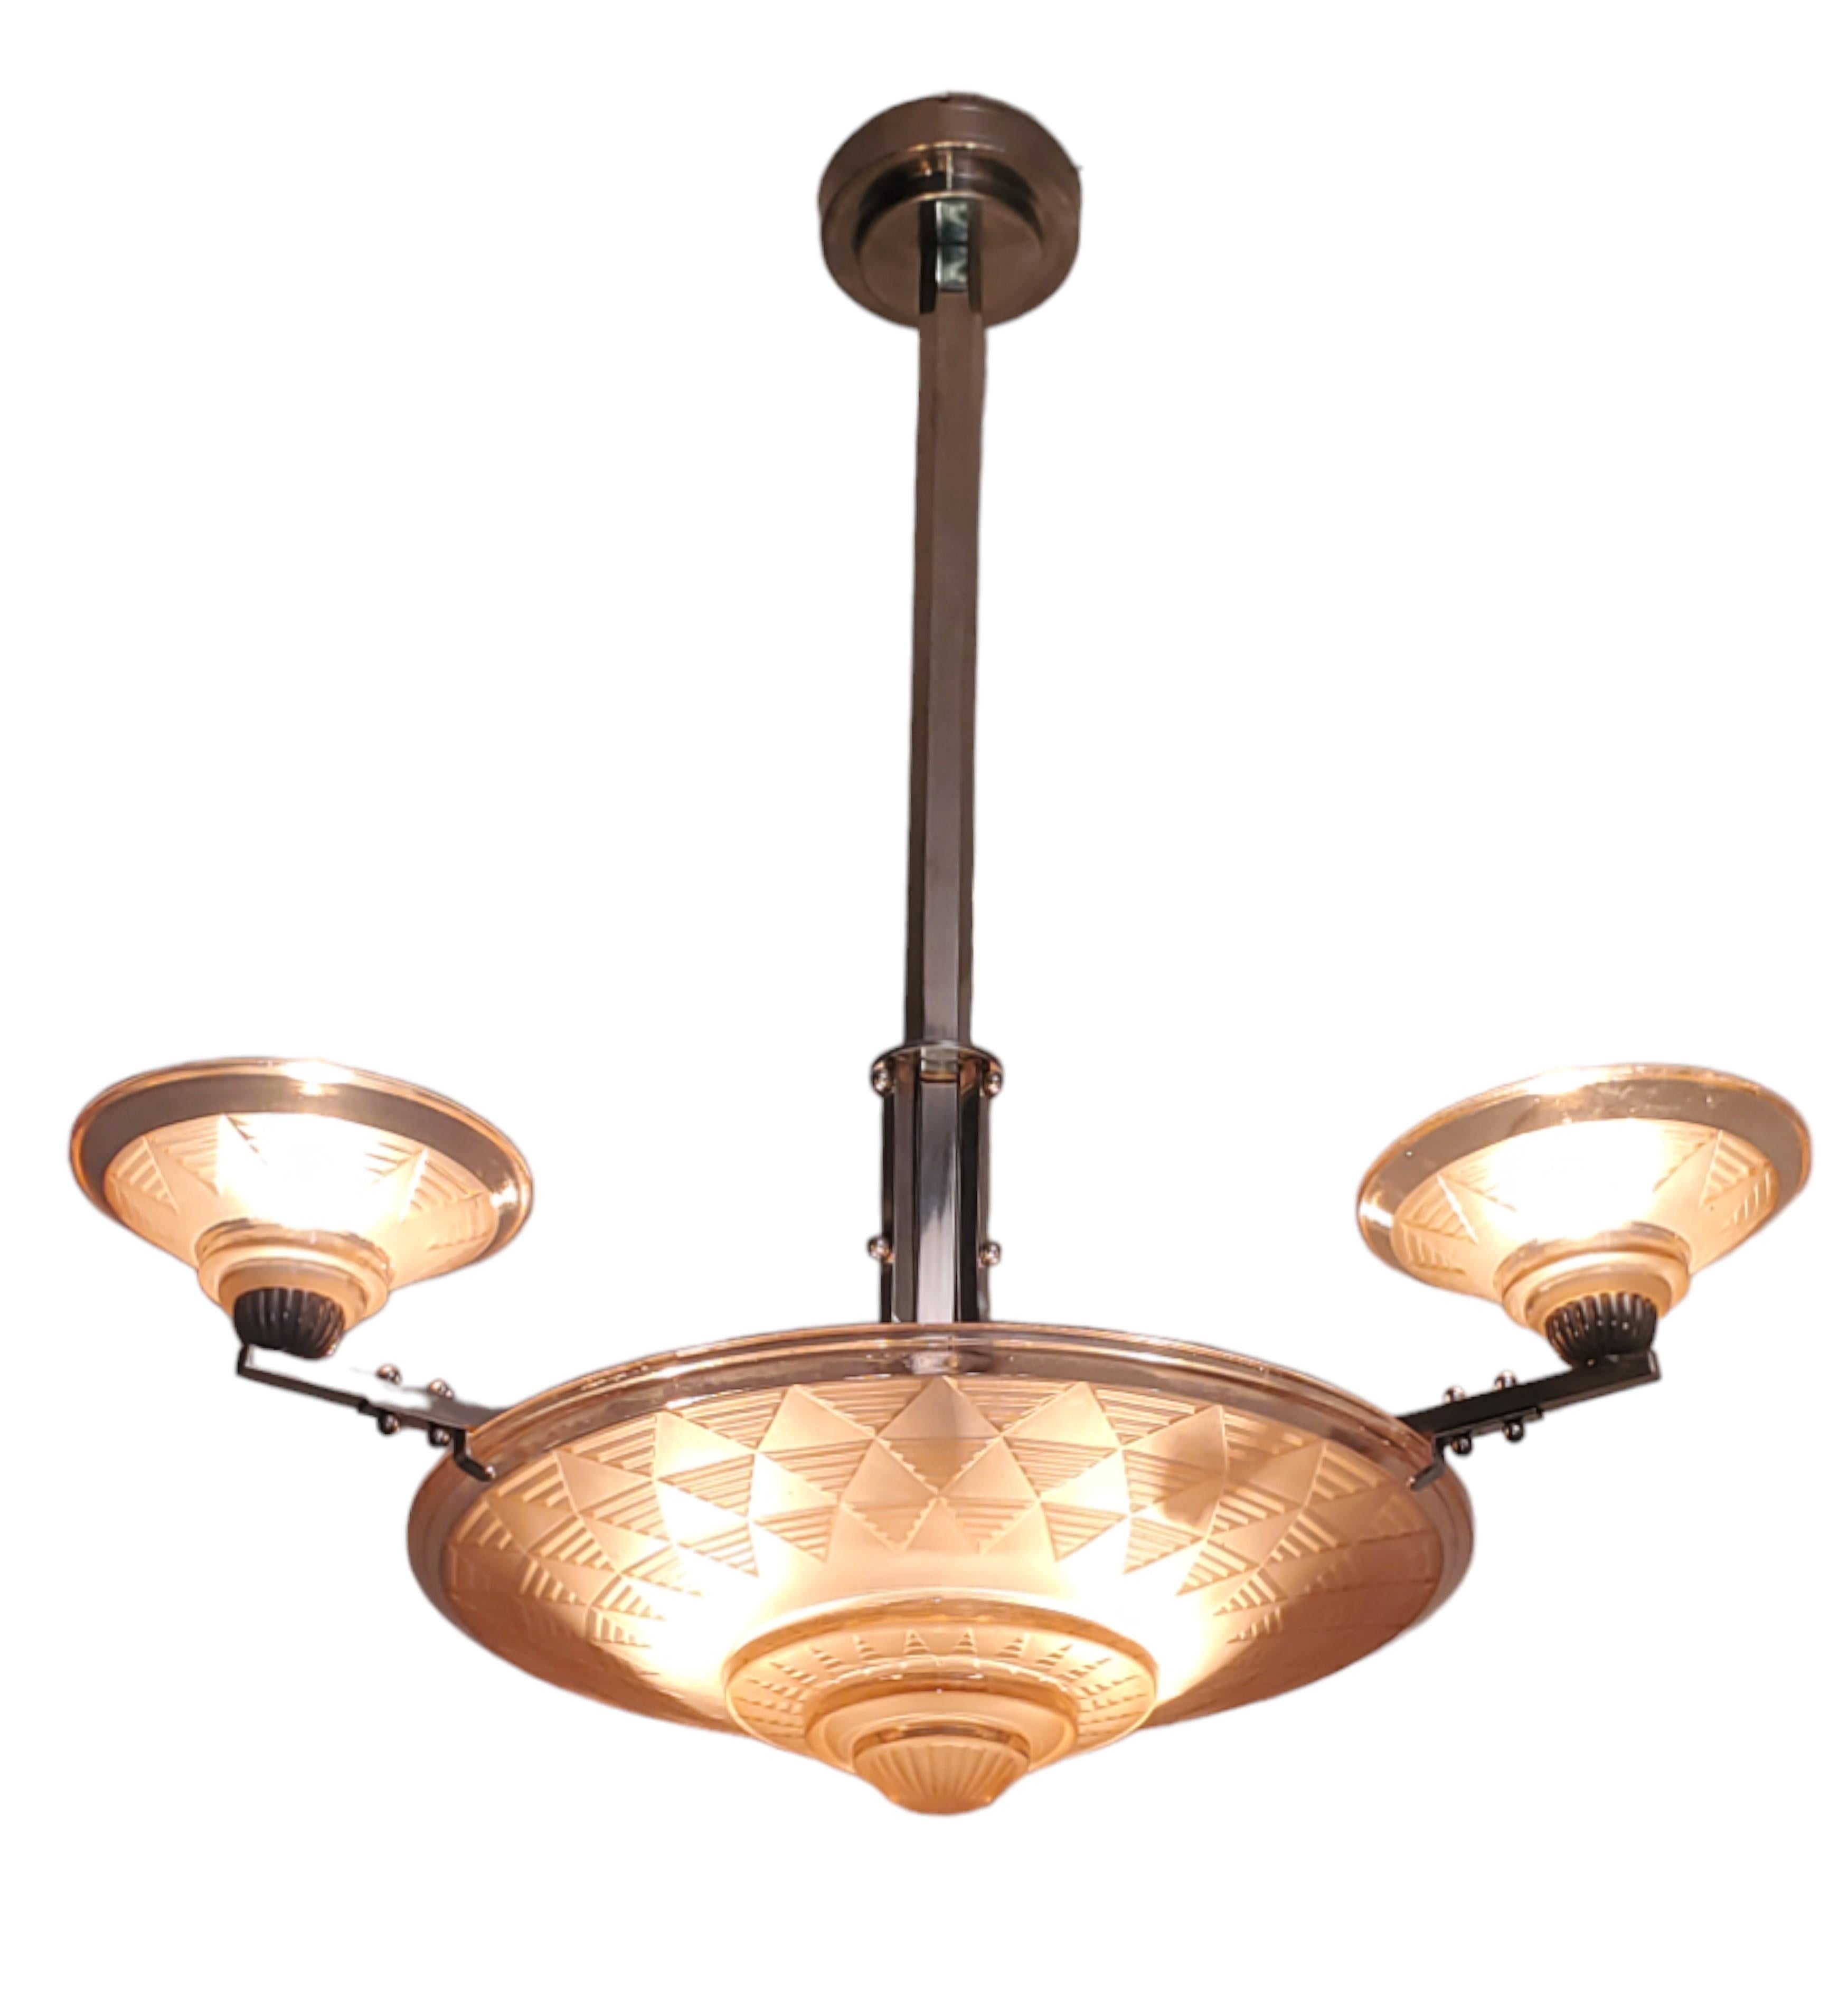 Petitot Art Deco peach /salmon /pink frosted glass + nickeled bronze chandelier For Sale 2